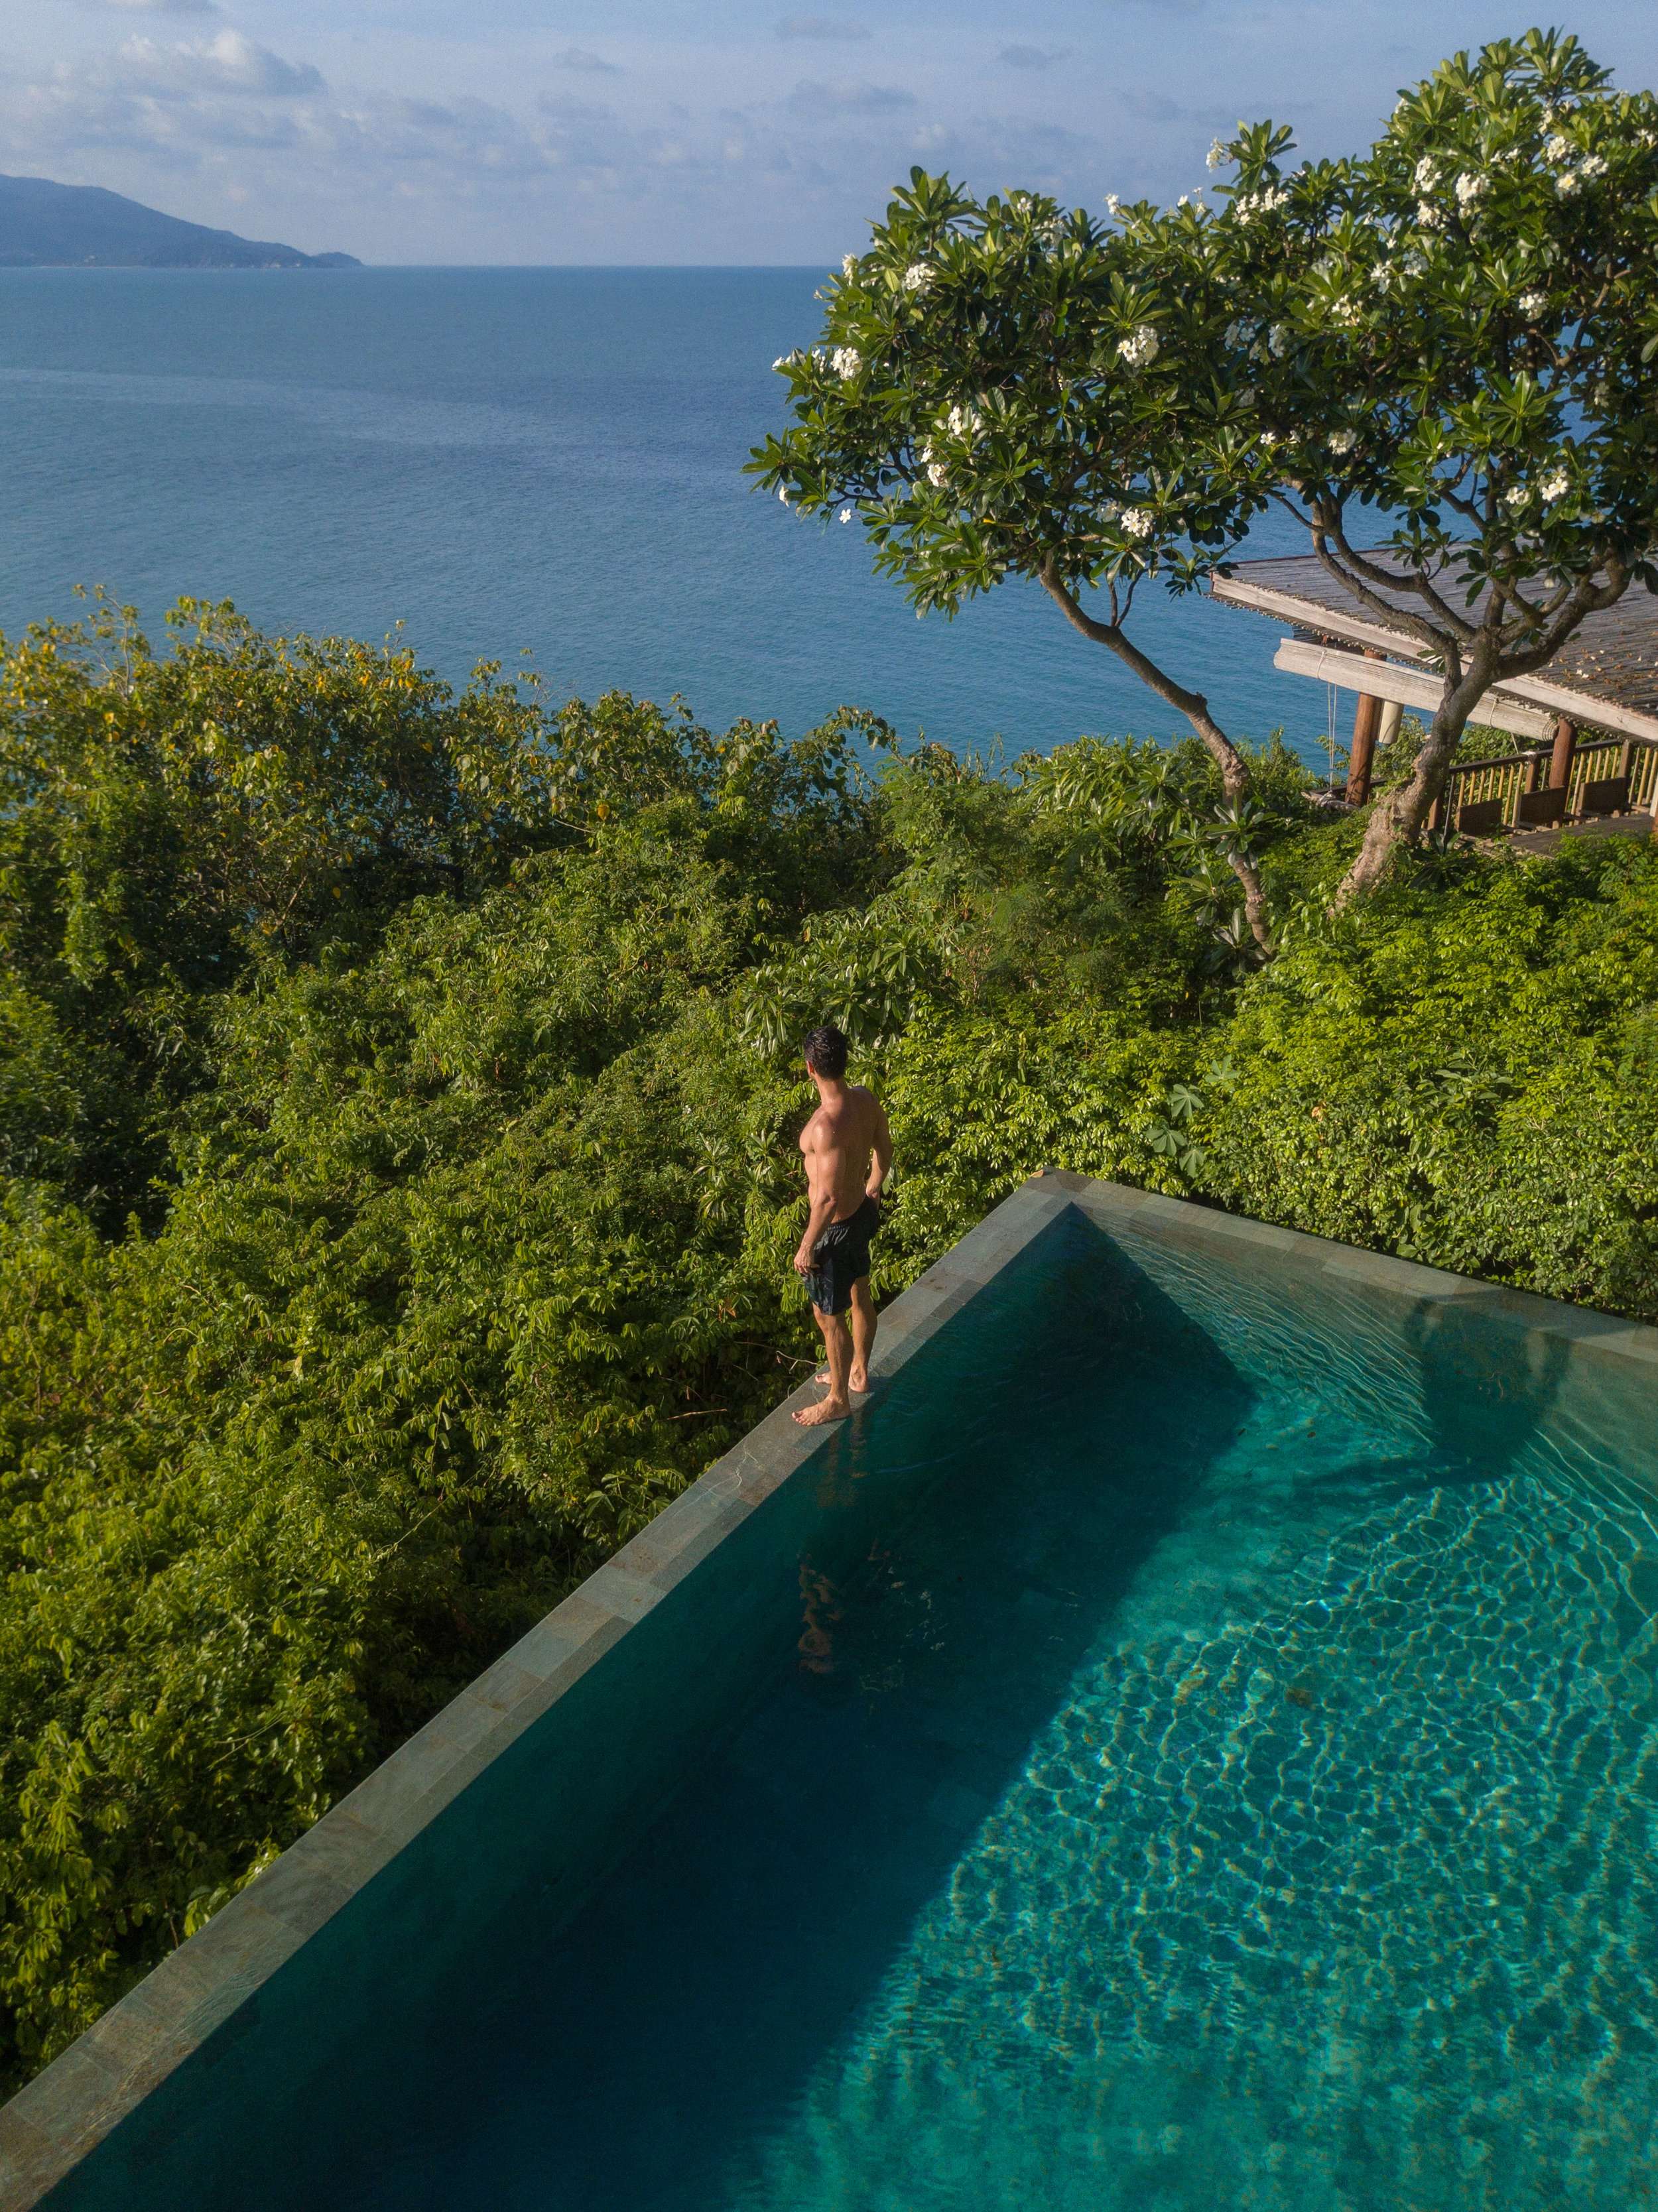  The Retreat - The resort’s largest Villa offers stunning and unforgettable views 